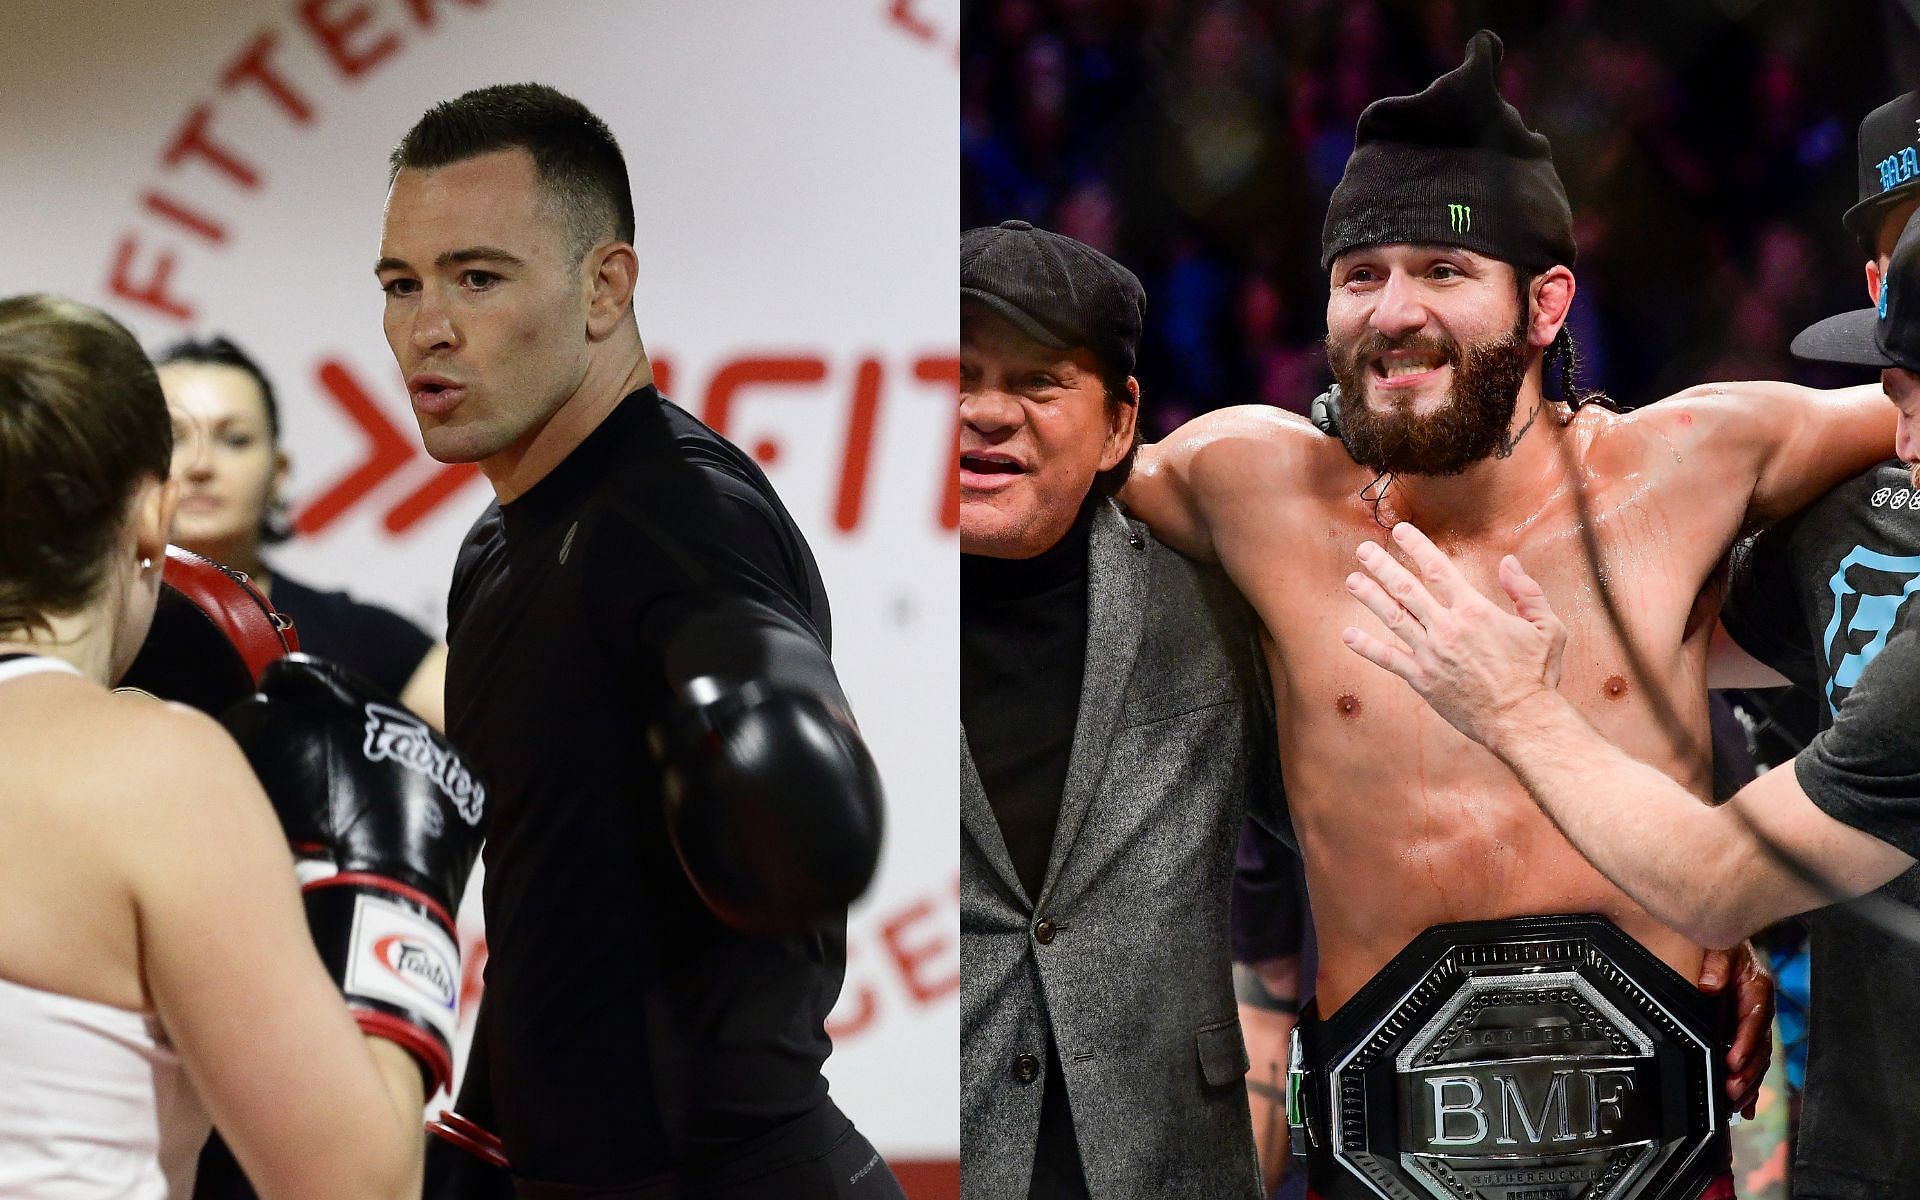 UFC welterweight contenders Colby Covington (left) and Jorge Masvidal (right)